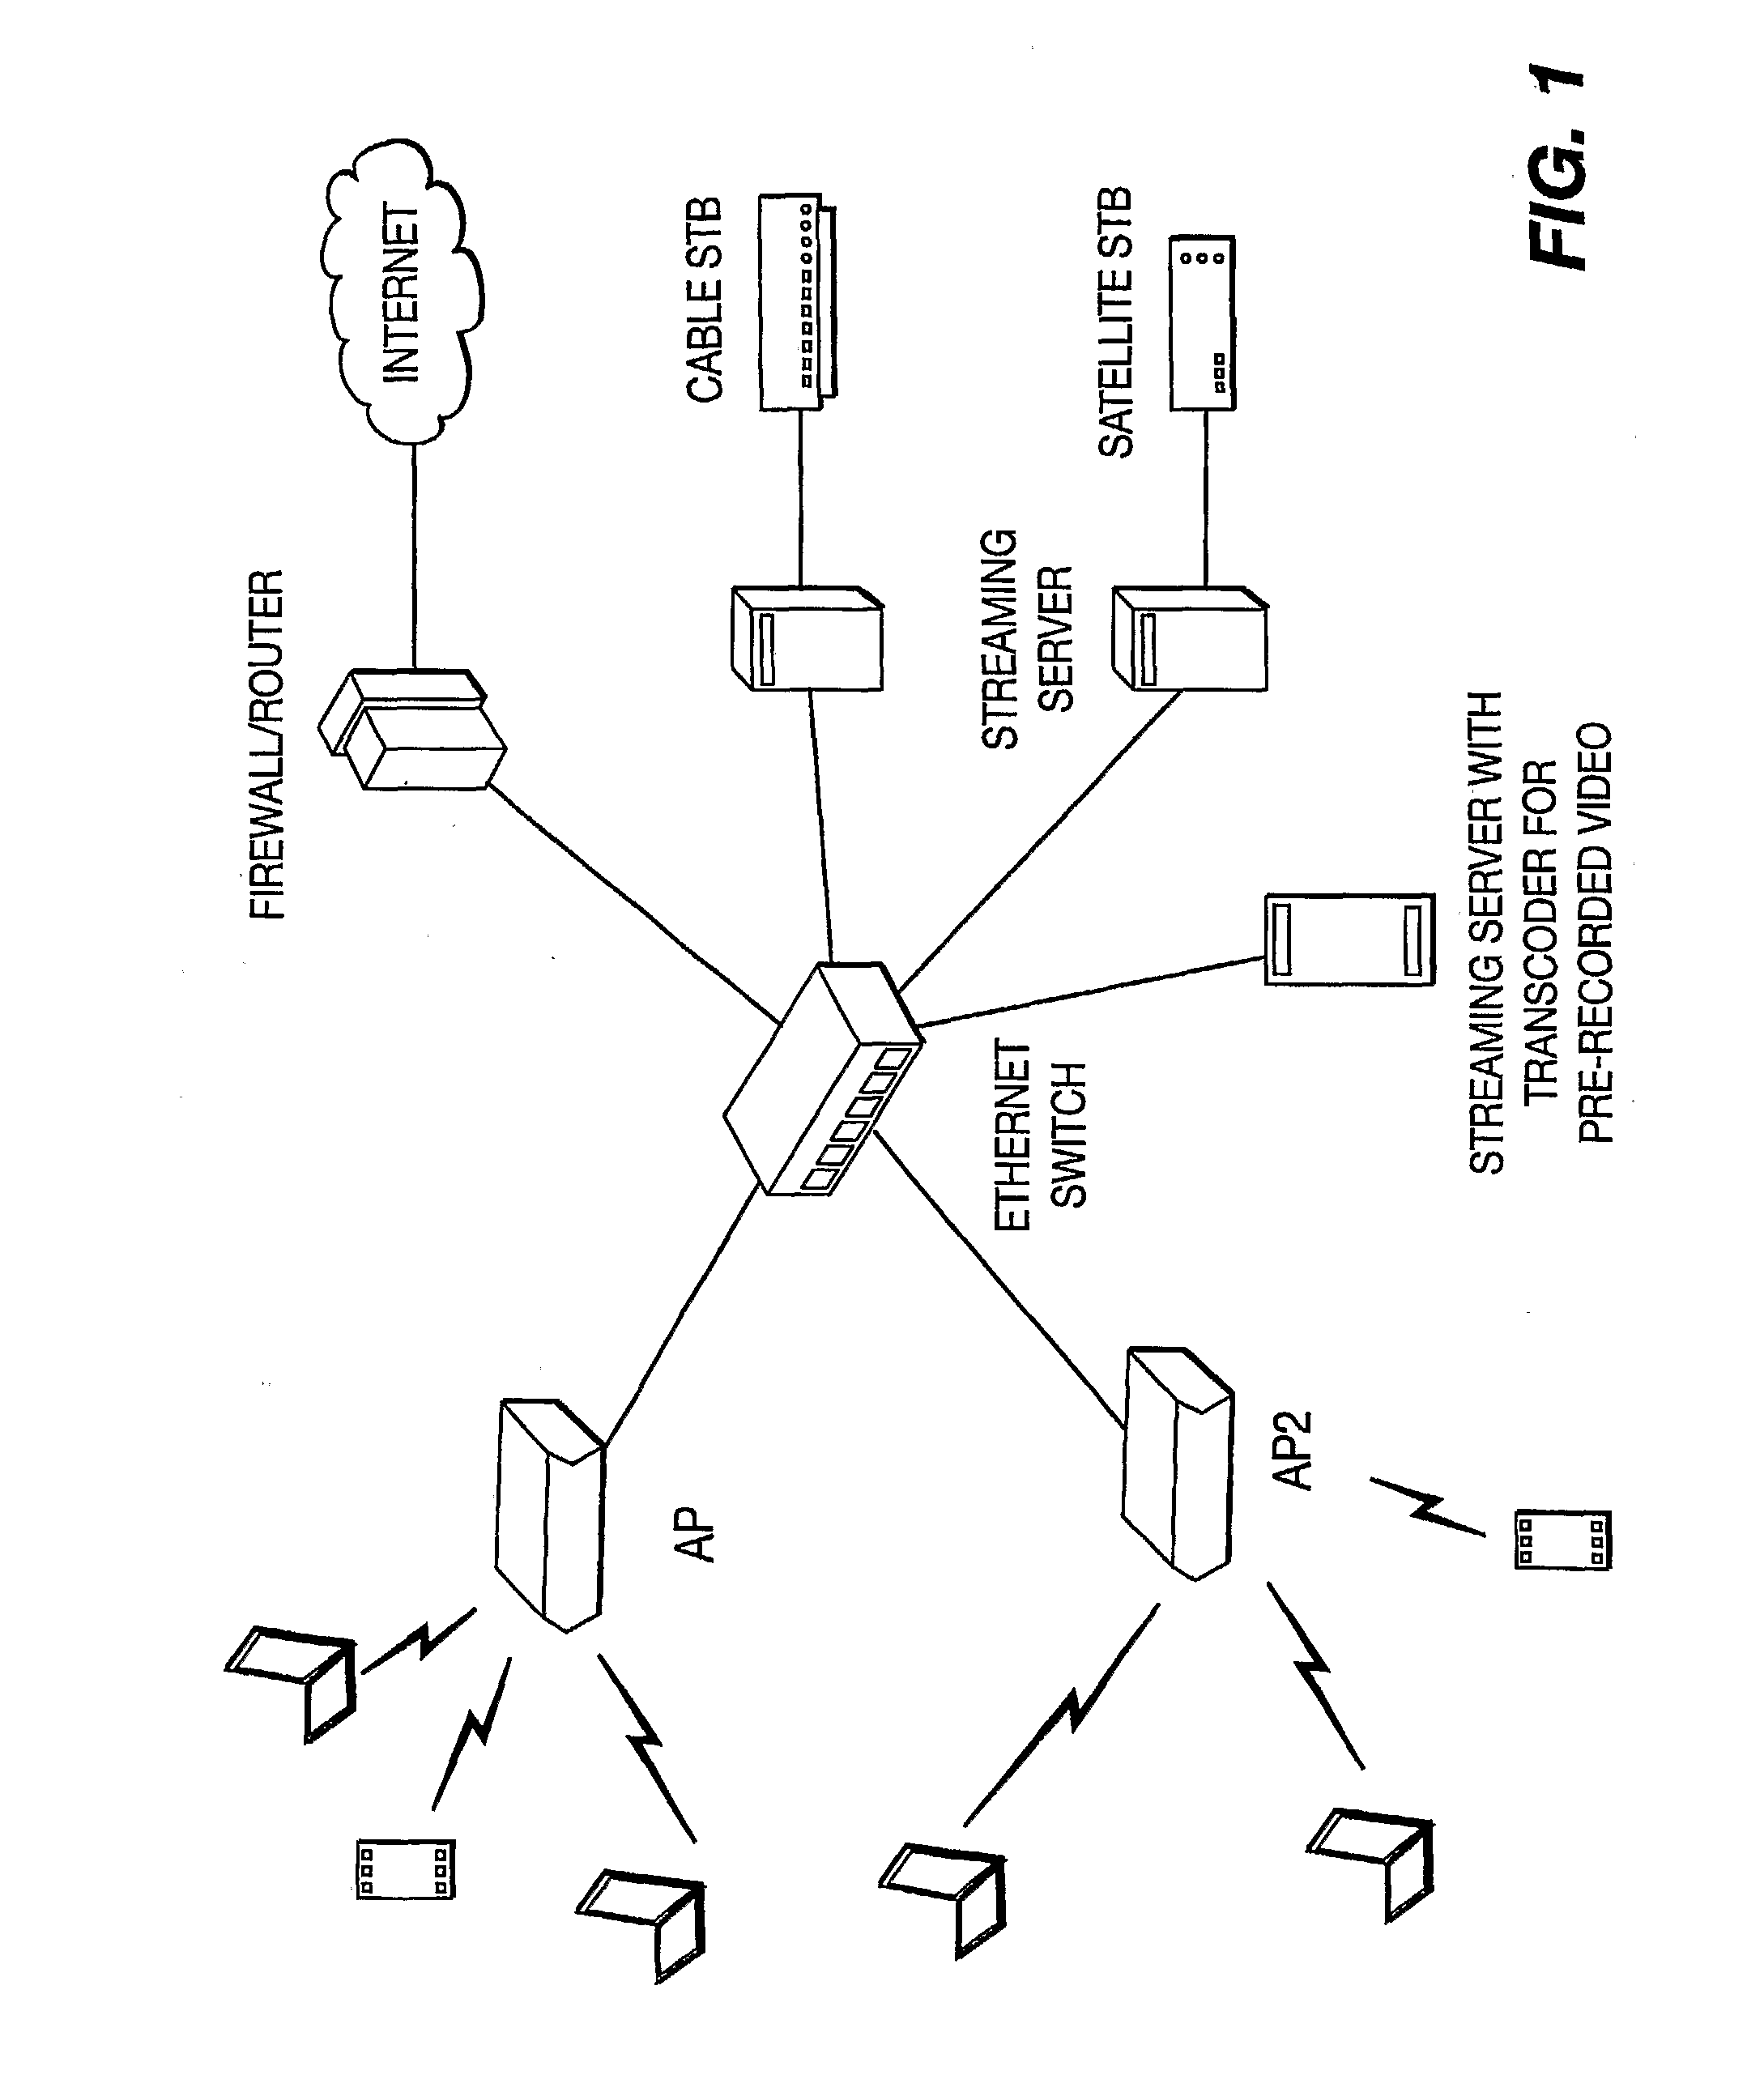 Adaptive Joint Source and Channel Coding Scheme for H.264 Video Multicasting Over Wireless Networks